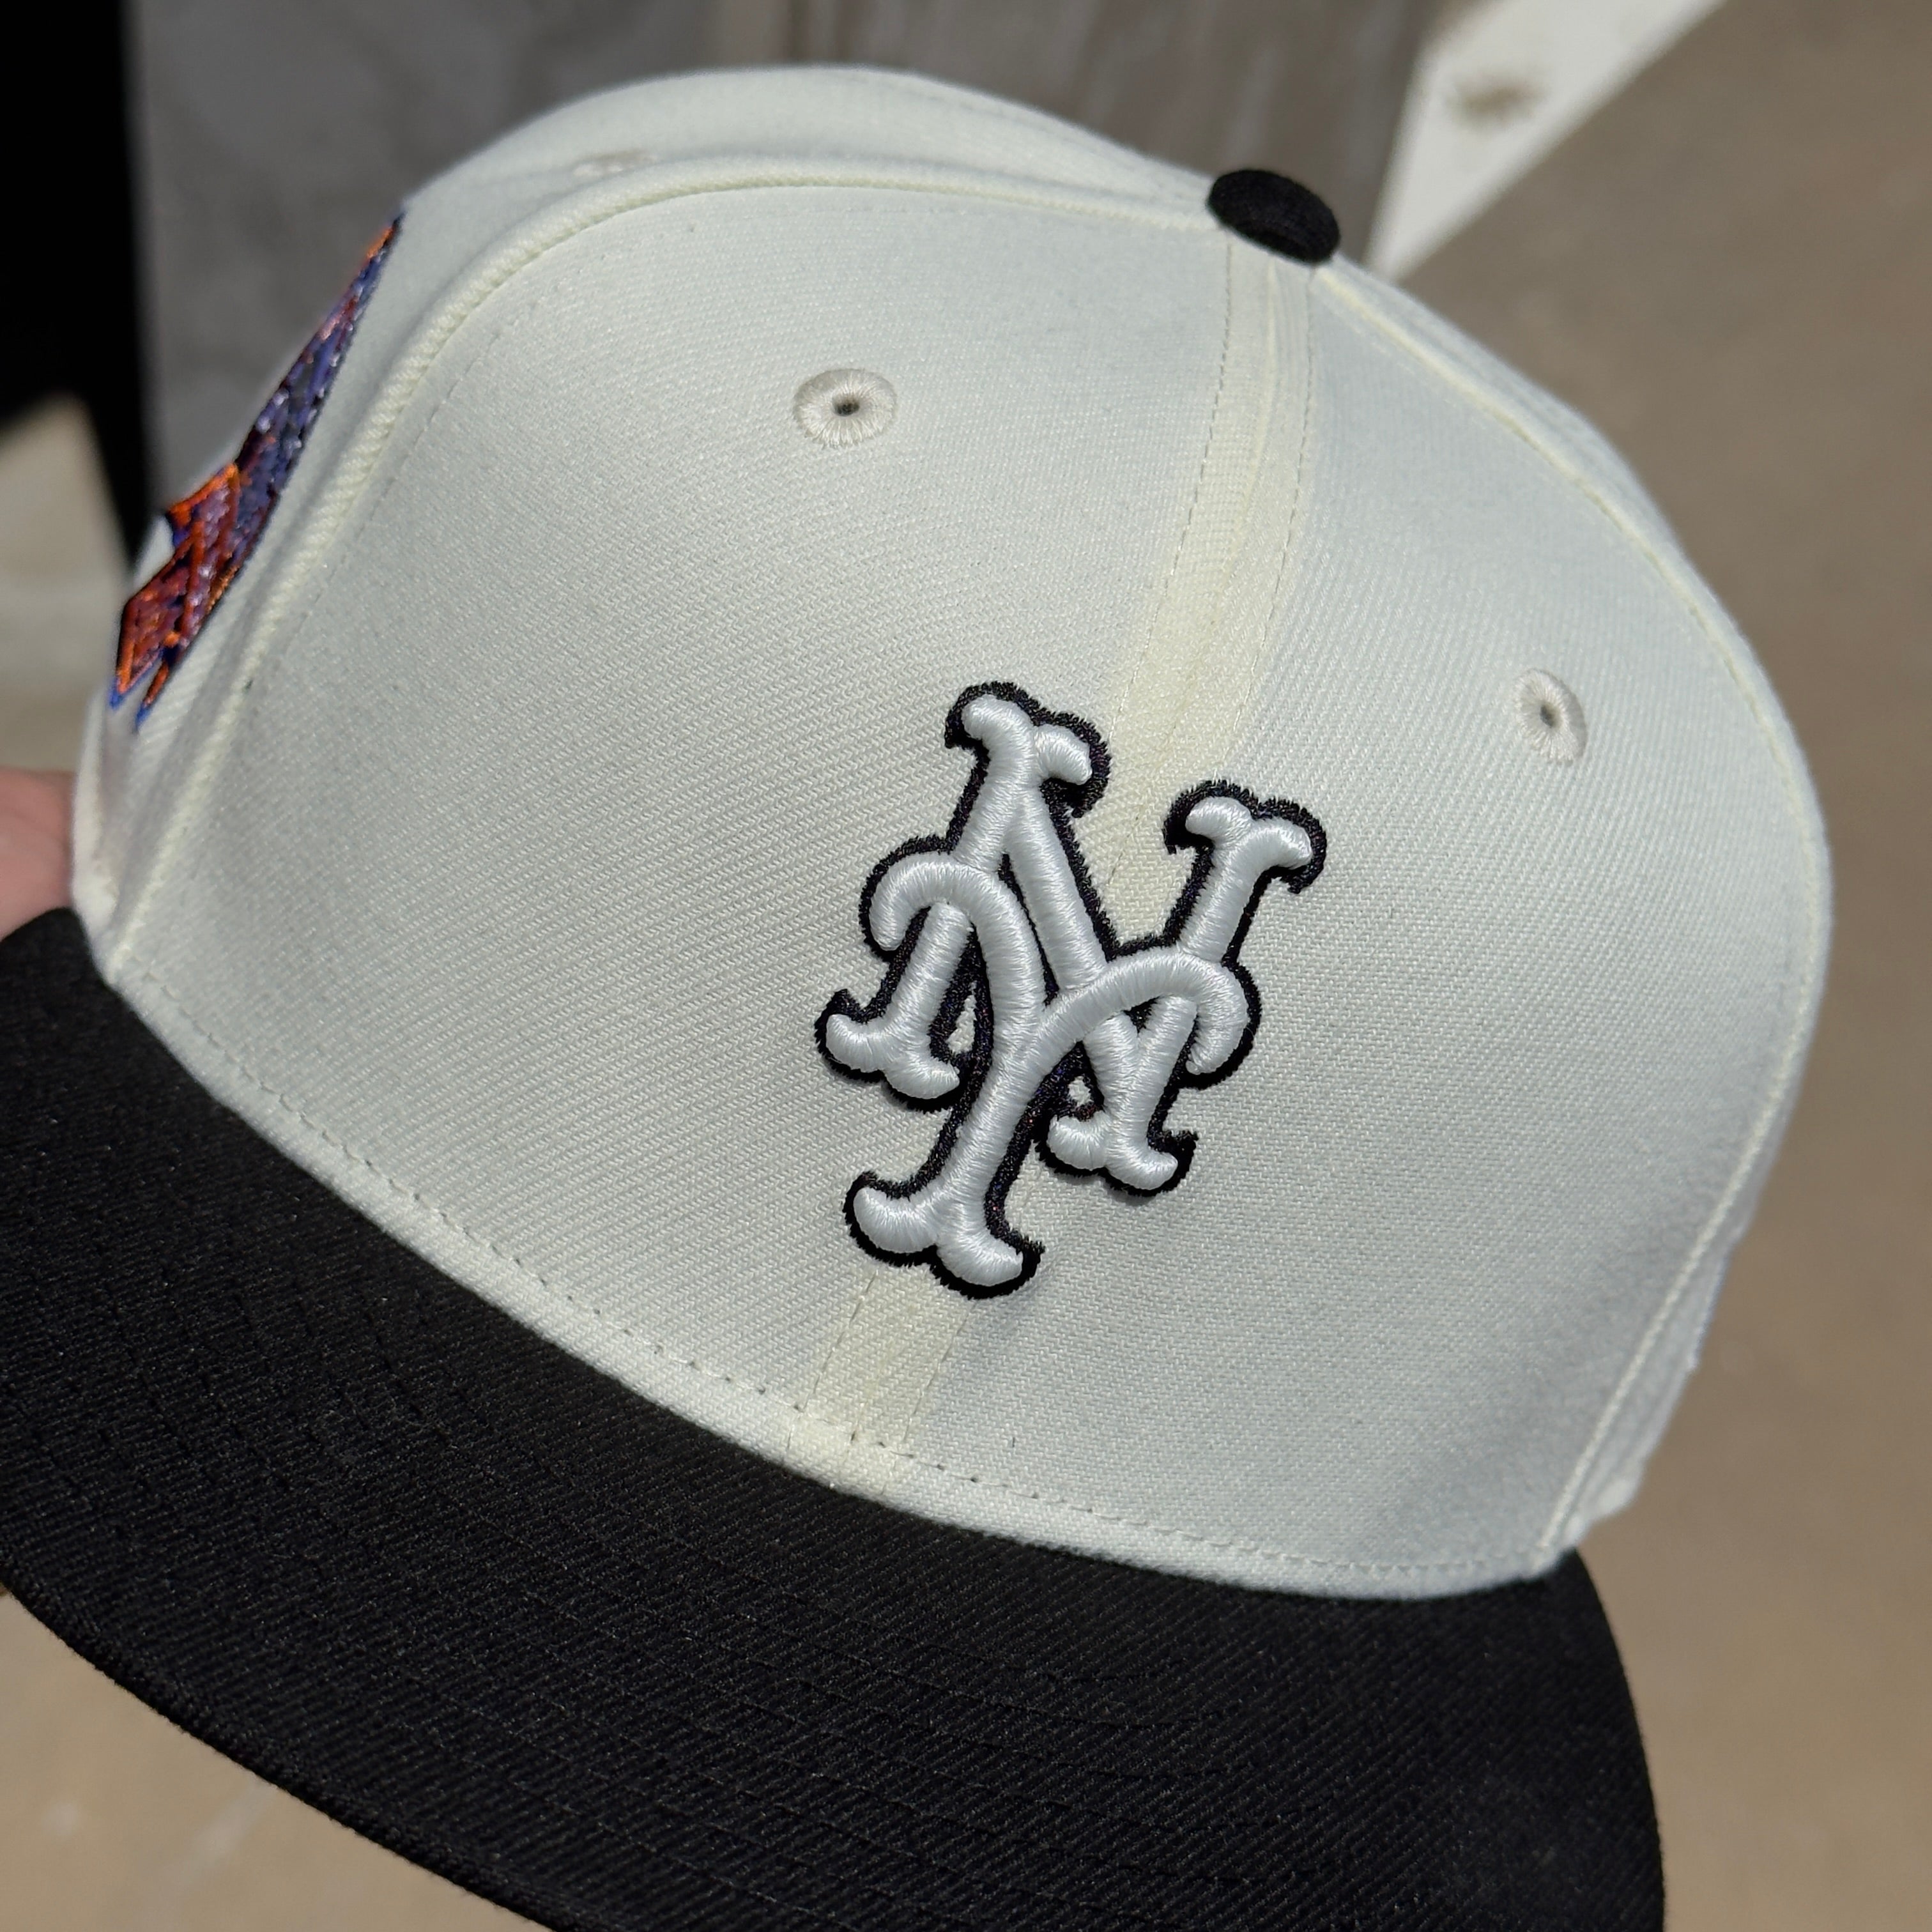 USED 1/2 Chrome White New York Mets Shea Stadium 59FIFTY New Era Fitted Hat